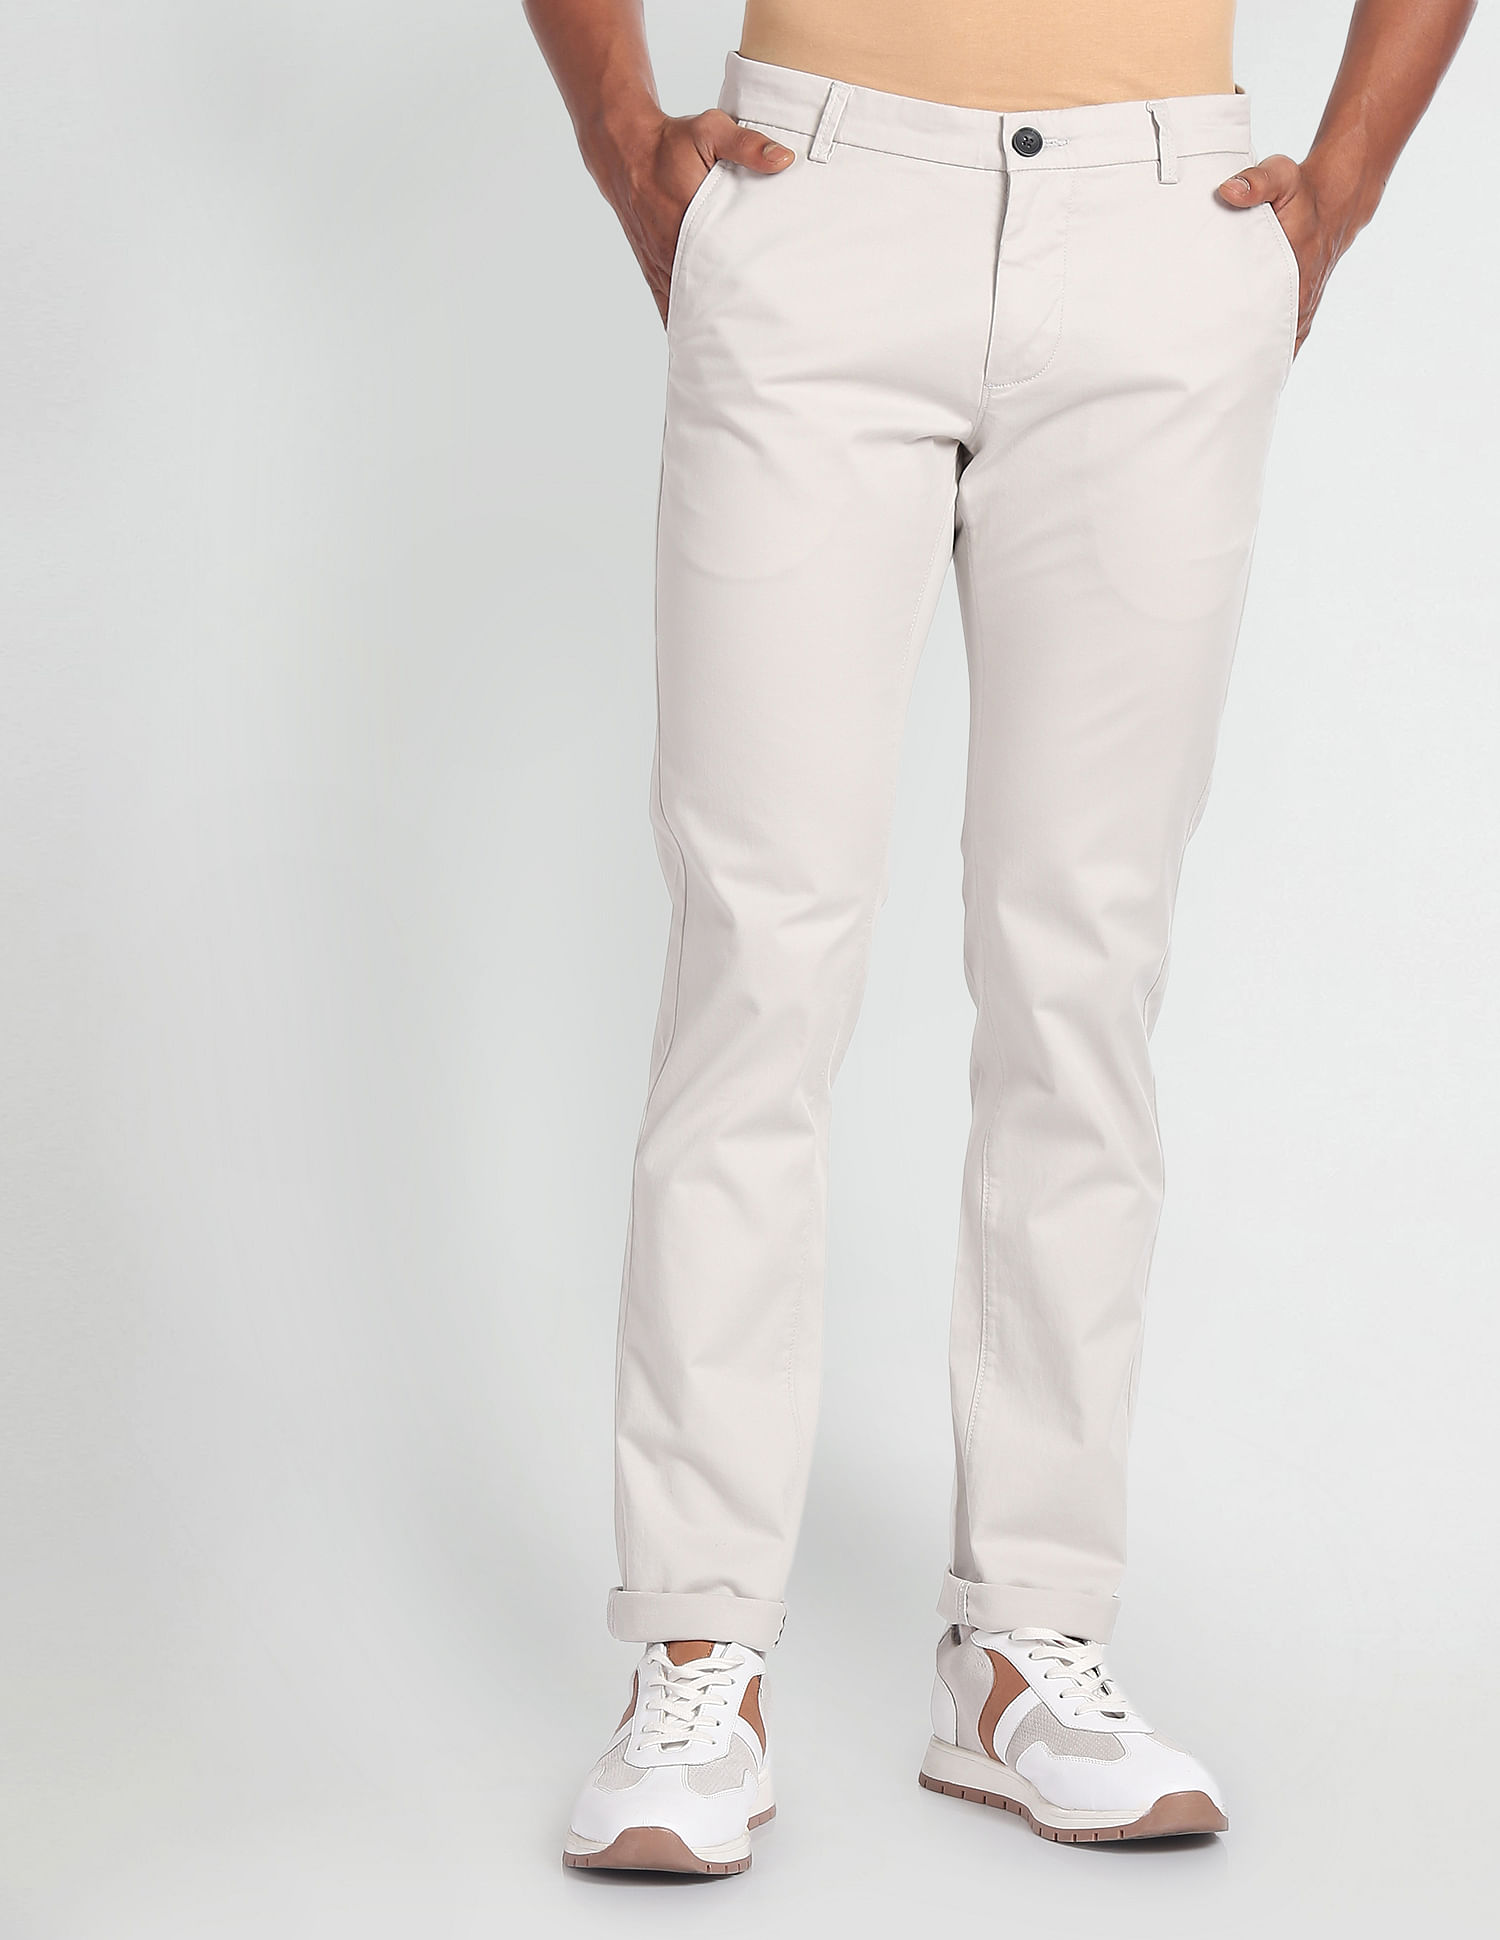 Live In Jeans Slim Fit Men White Trousers - Buy Live In Jeans Slim Fit Men White  Trousers Online at Best Prices in India | Flipkart.com